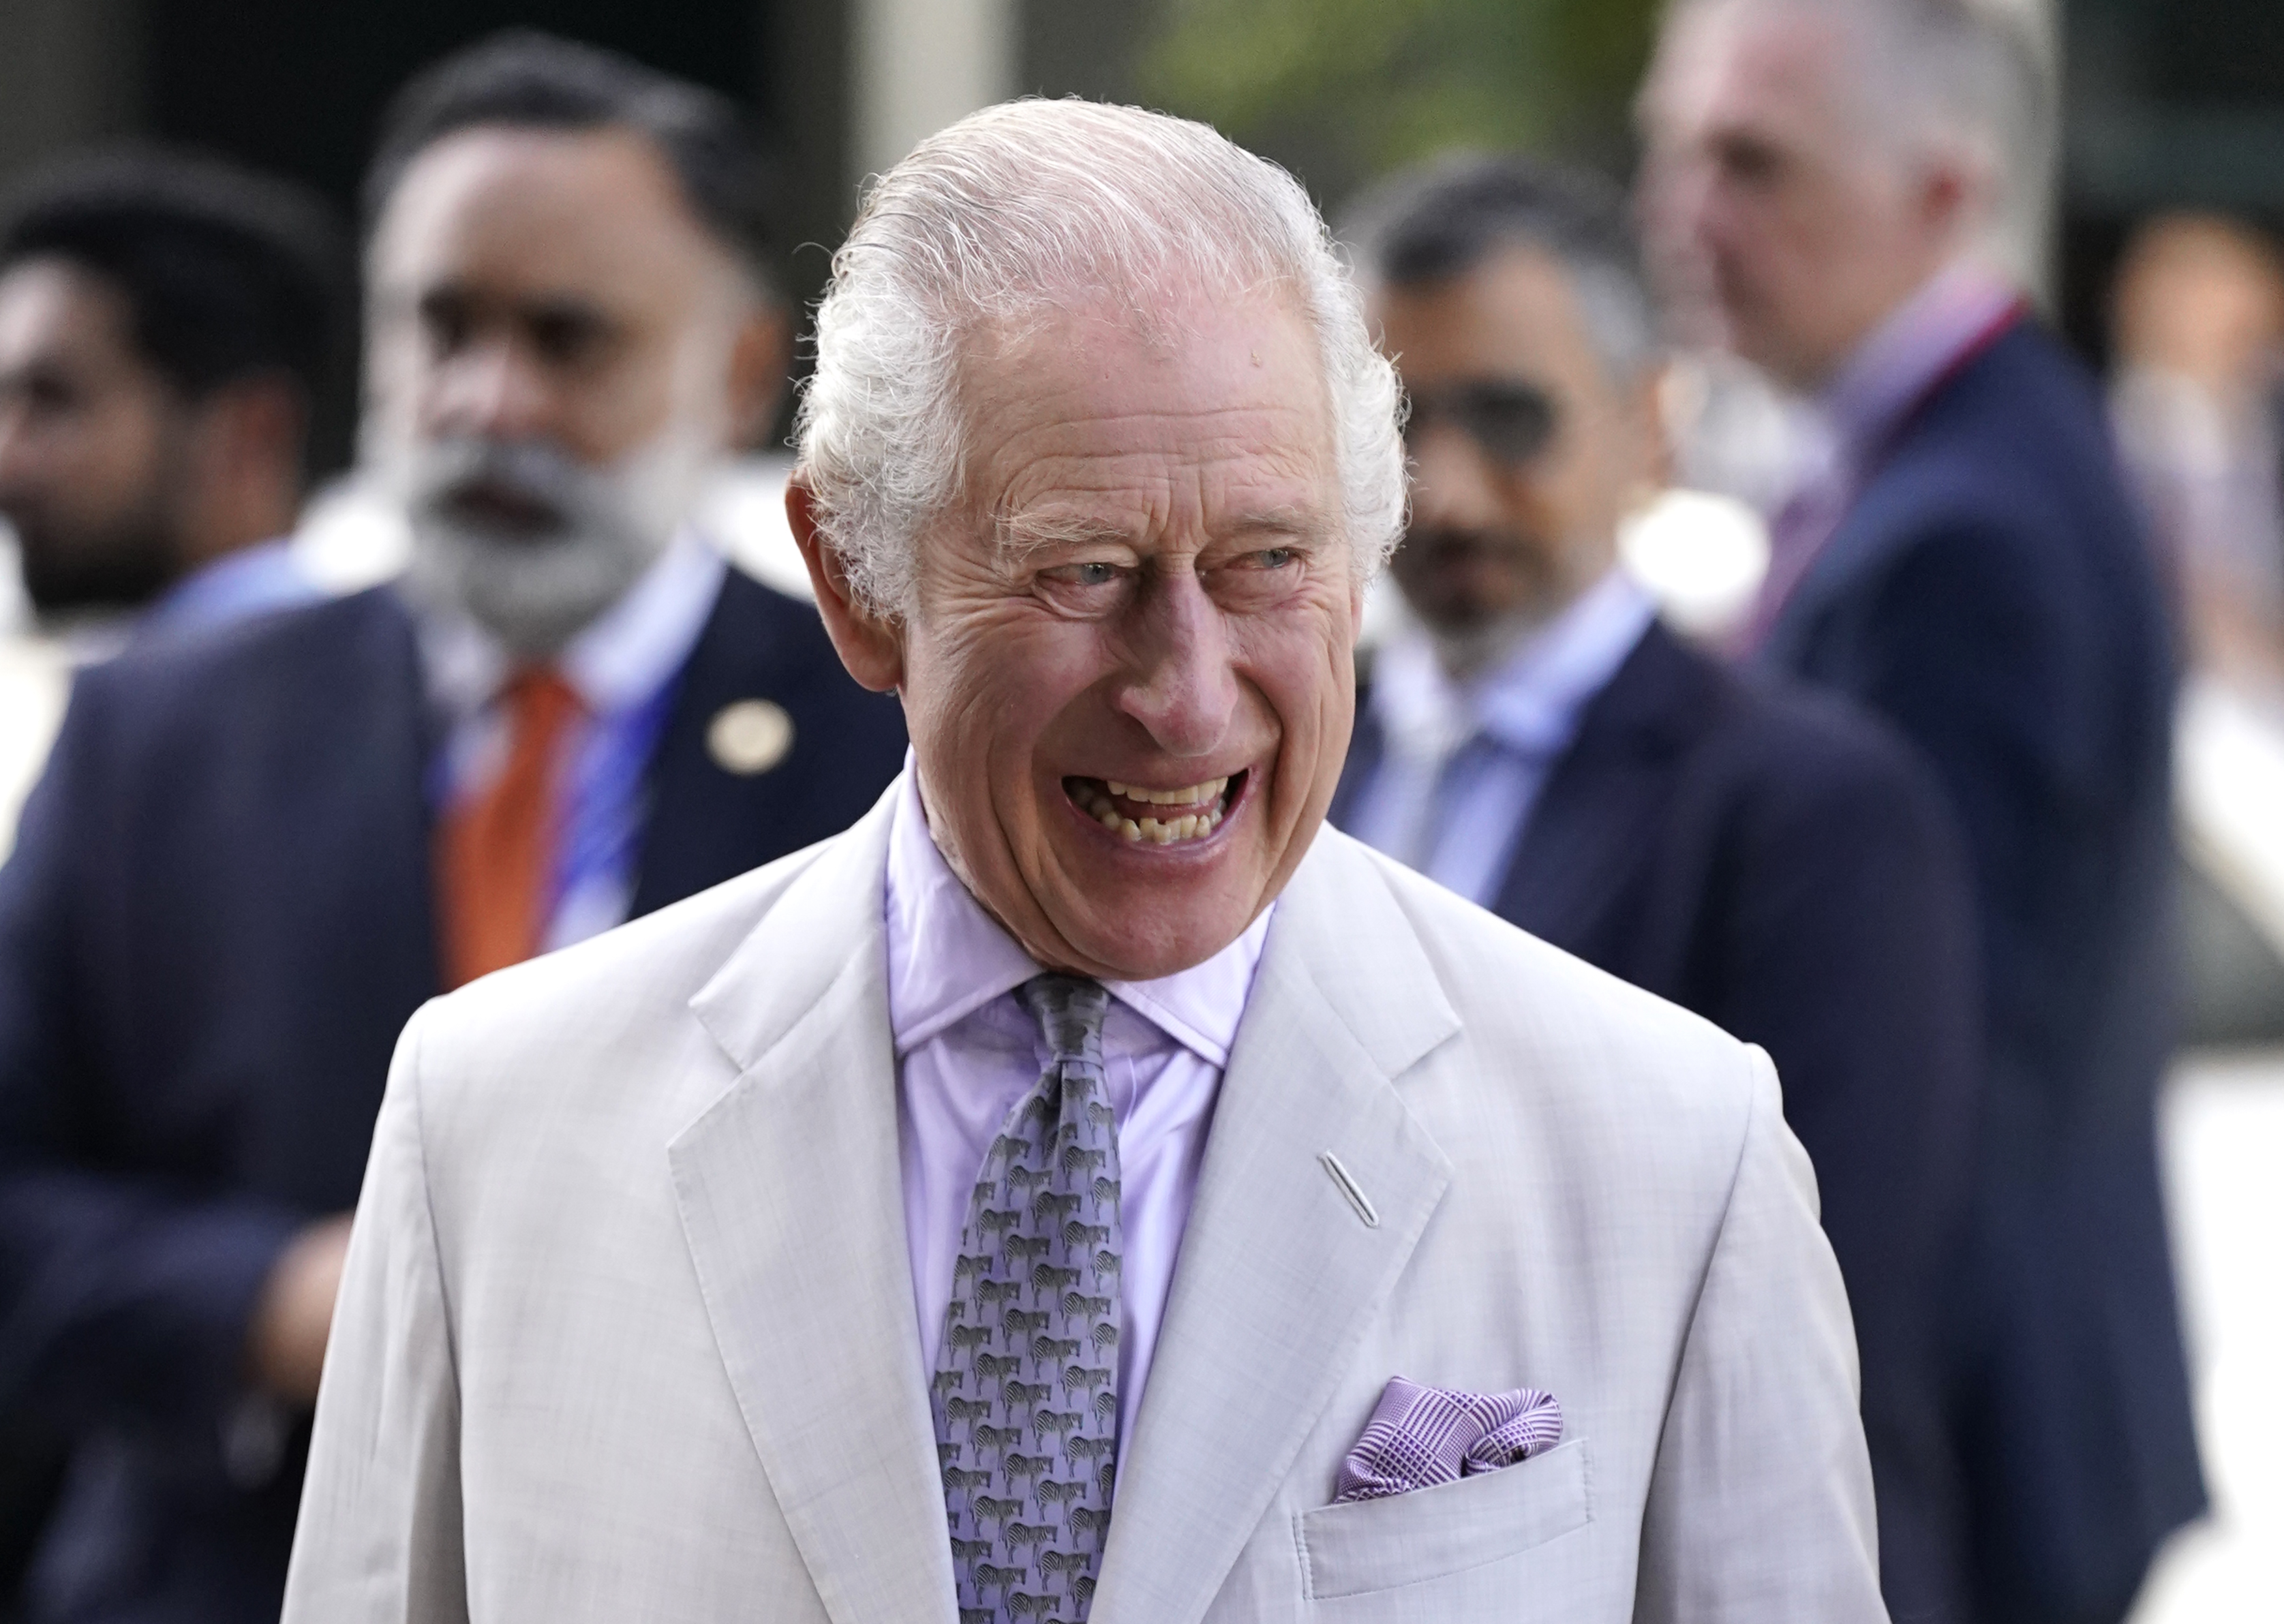 <p><span>Unbothered? </span></p><p>King Charles III was all smiles when he visited the Heriot-Watt University Dubai Campus during the COP28 climate change summit on Nov. 30, 2023.</p><p>Charles' jolly appearance came one day after Piers Morgan claimed, <a href="https://www.tmz.com/2023/11/30/piers-morgan-omid-scobie-book-names-royal-family-racists-king-charles-kate-middleton/">TMZ</a> reported, that the monarch -- and Princess Kate -- had been named in the Dutch translation of new book "Endgame: Inside the Royal Family and the Monarchy's Fight for Survival" <span>as two "royal racists" who questioned how dark his grandchildren's skin tone might be when son Prince Harry started a family with Duchess Meghan, who's biracial. </span>Piers further said he didn't believe either was racist.</p><p><span>The book's author, longtime royals reporter Omid Scobie, </span>however, denied revealing the identity of the two people his sources said expressed skin color concerns amid claims of unconscious bias within the royal family. "I never submitted a book that had those names in it," Omid said on British breakfast show "This Morning."</p><p>MORE: <a href="https://www.wonderwall.com/celebrity/the-coronation-of-king-charles-iii-and-queen-camilla-the-best-pictures-of-all-the-royals-at-this-historic-event-735015.gallery">The best photos from King Charles III and Queen Camilla's coronation</a></p>